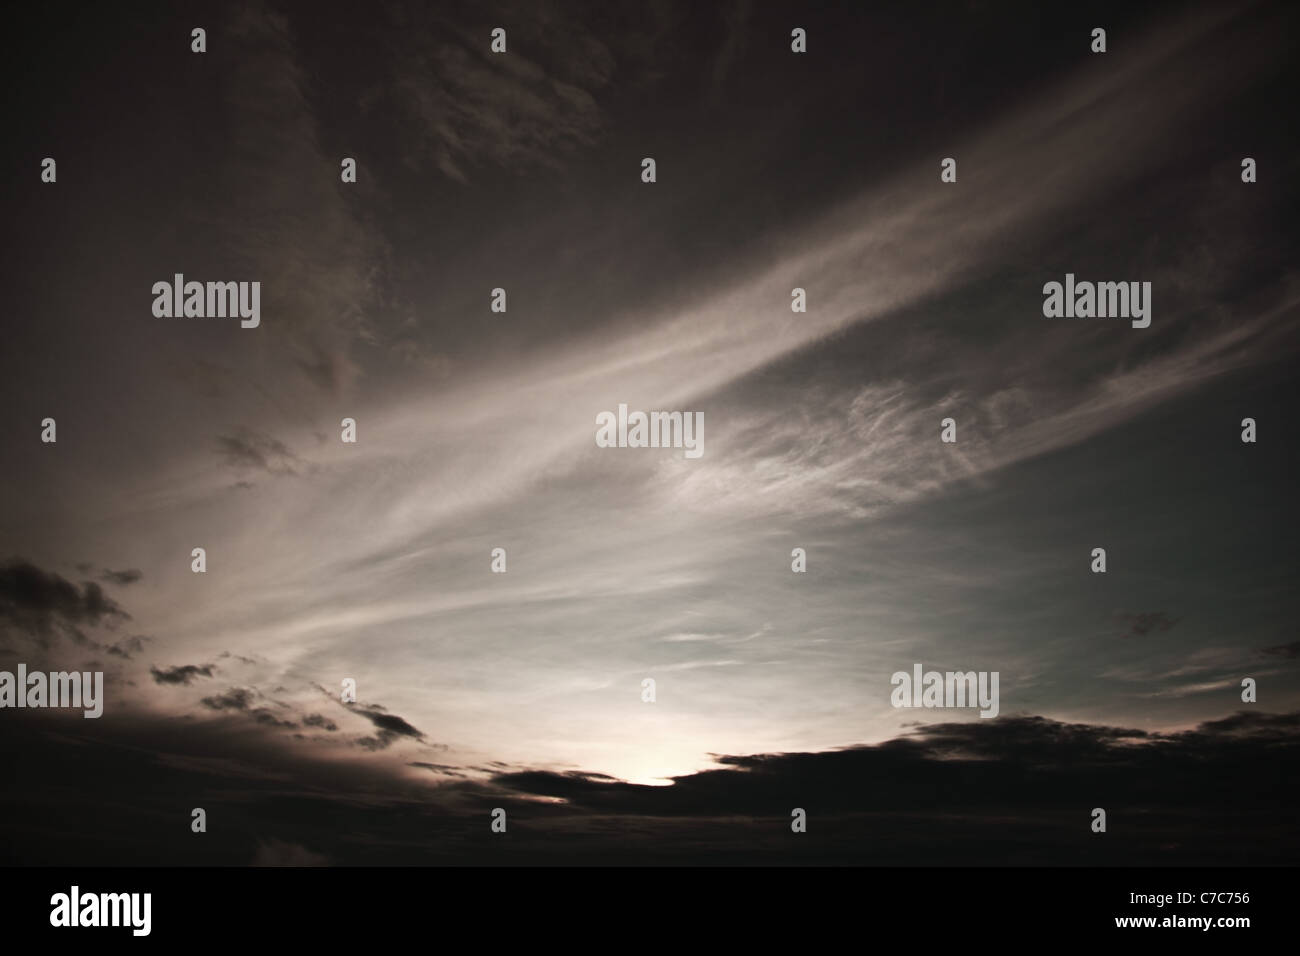 Dramatic sky just before sunrise or after sunset Stock Photo